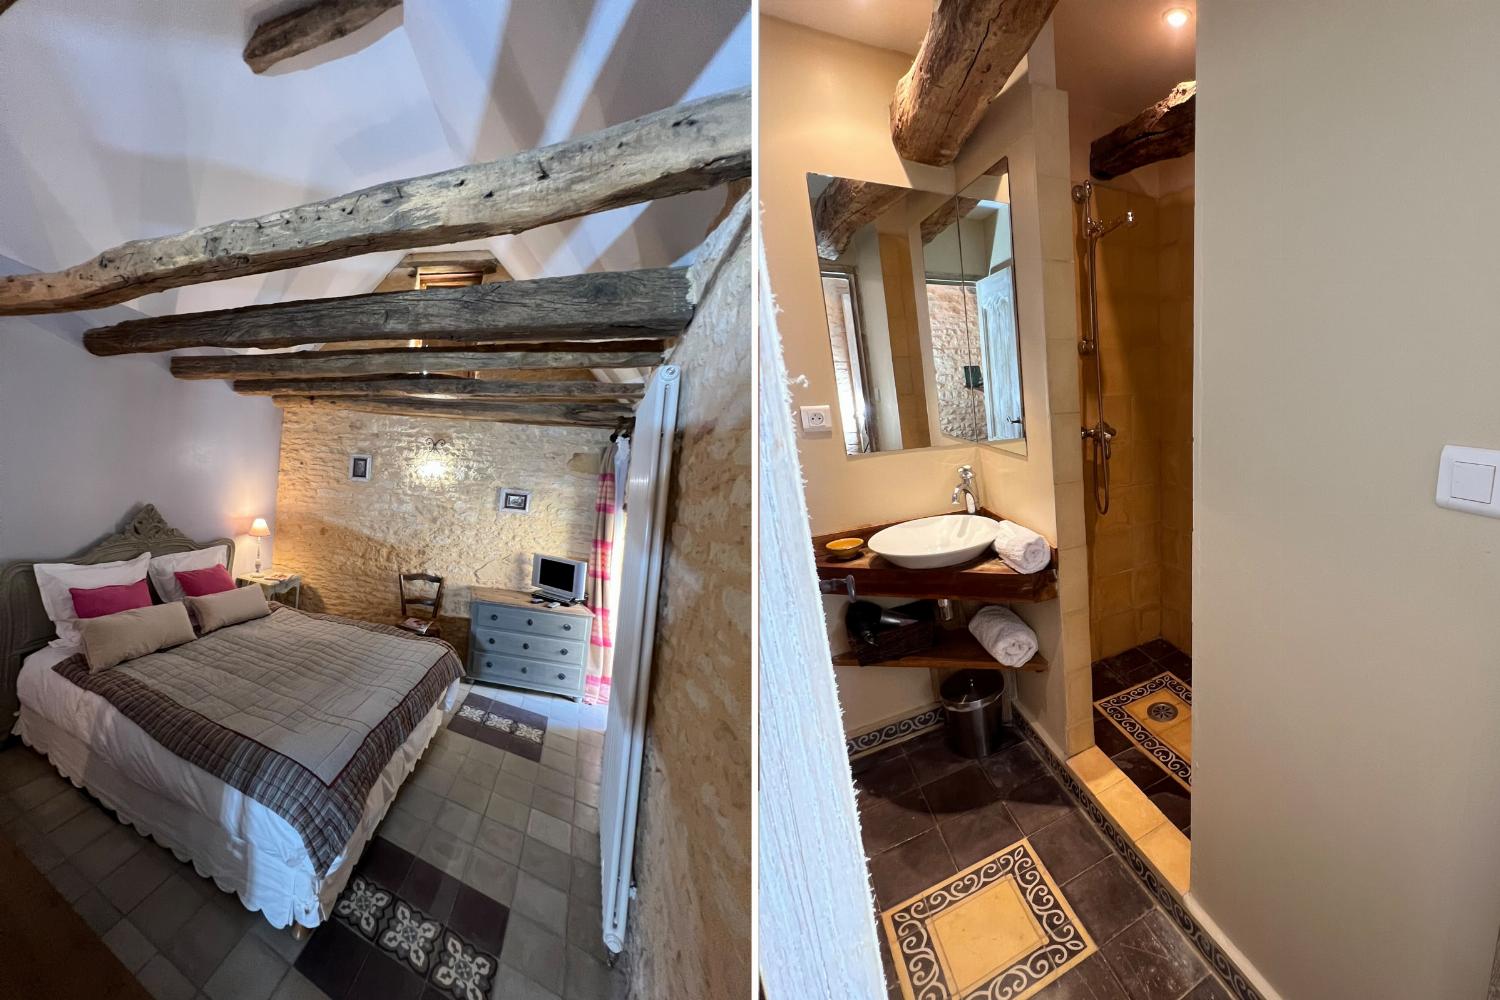 Bedroom and bathroom | Holiday home in Dordogne